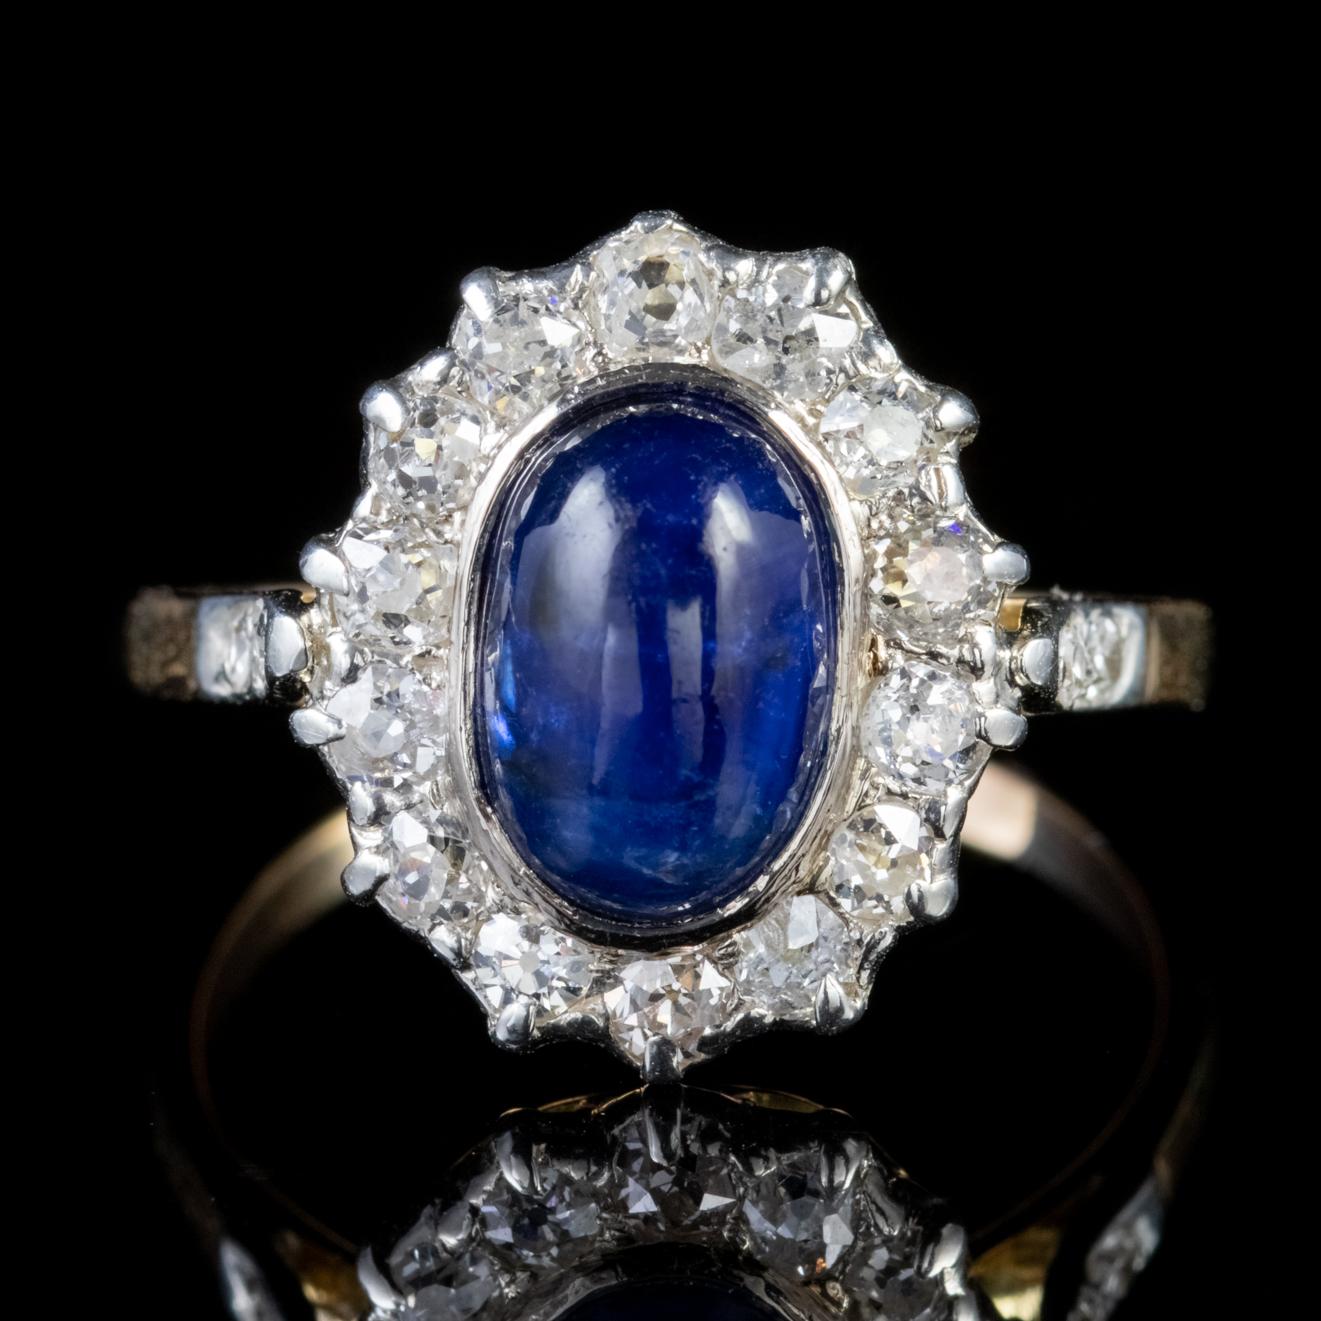 A beautiful Antique Victorian cluster ring crowned with a stunning cabochon cut Sapphire which is approx. 1.65ct and haloed by stunning old European cut Diamonds which are around 0.05ct each, 1ct in total. 

The Diamonds are beautiful, bright SI1